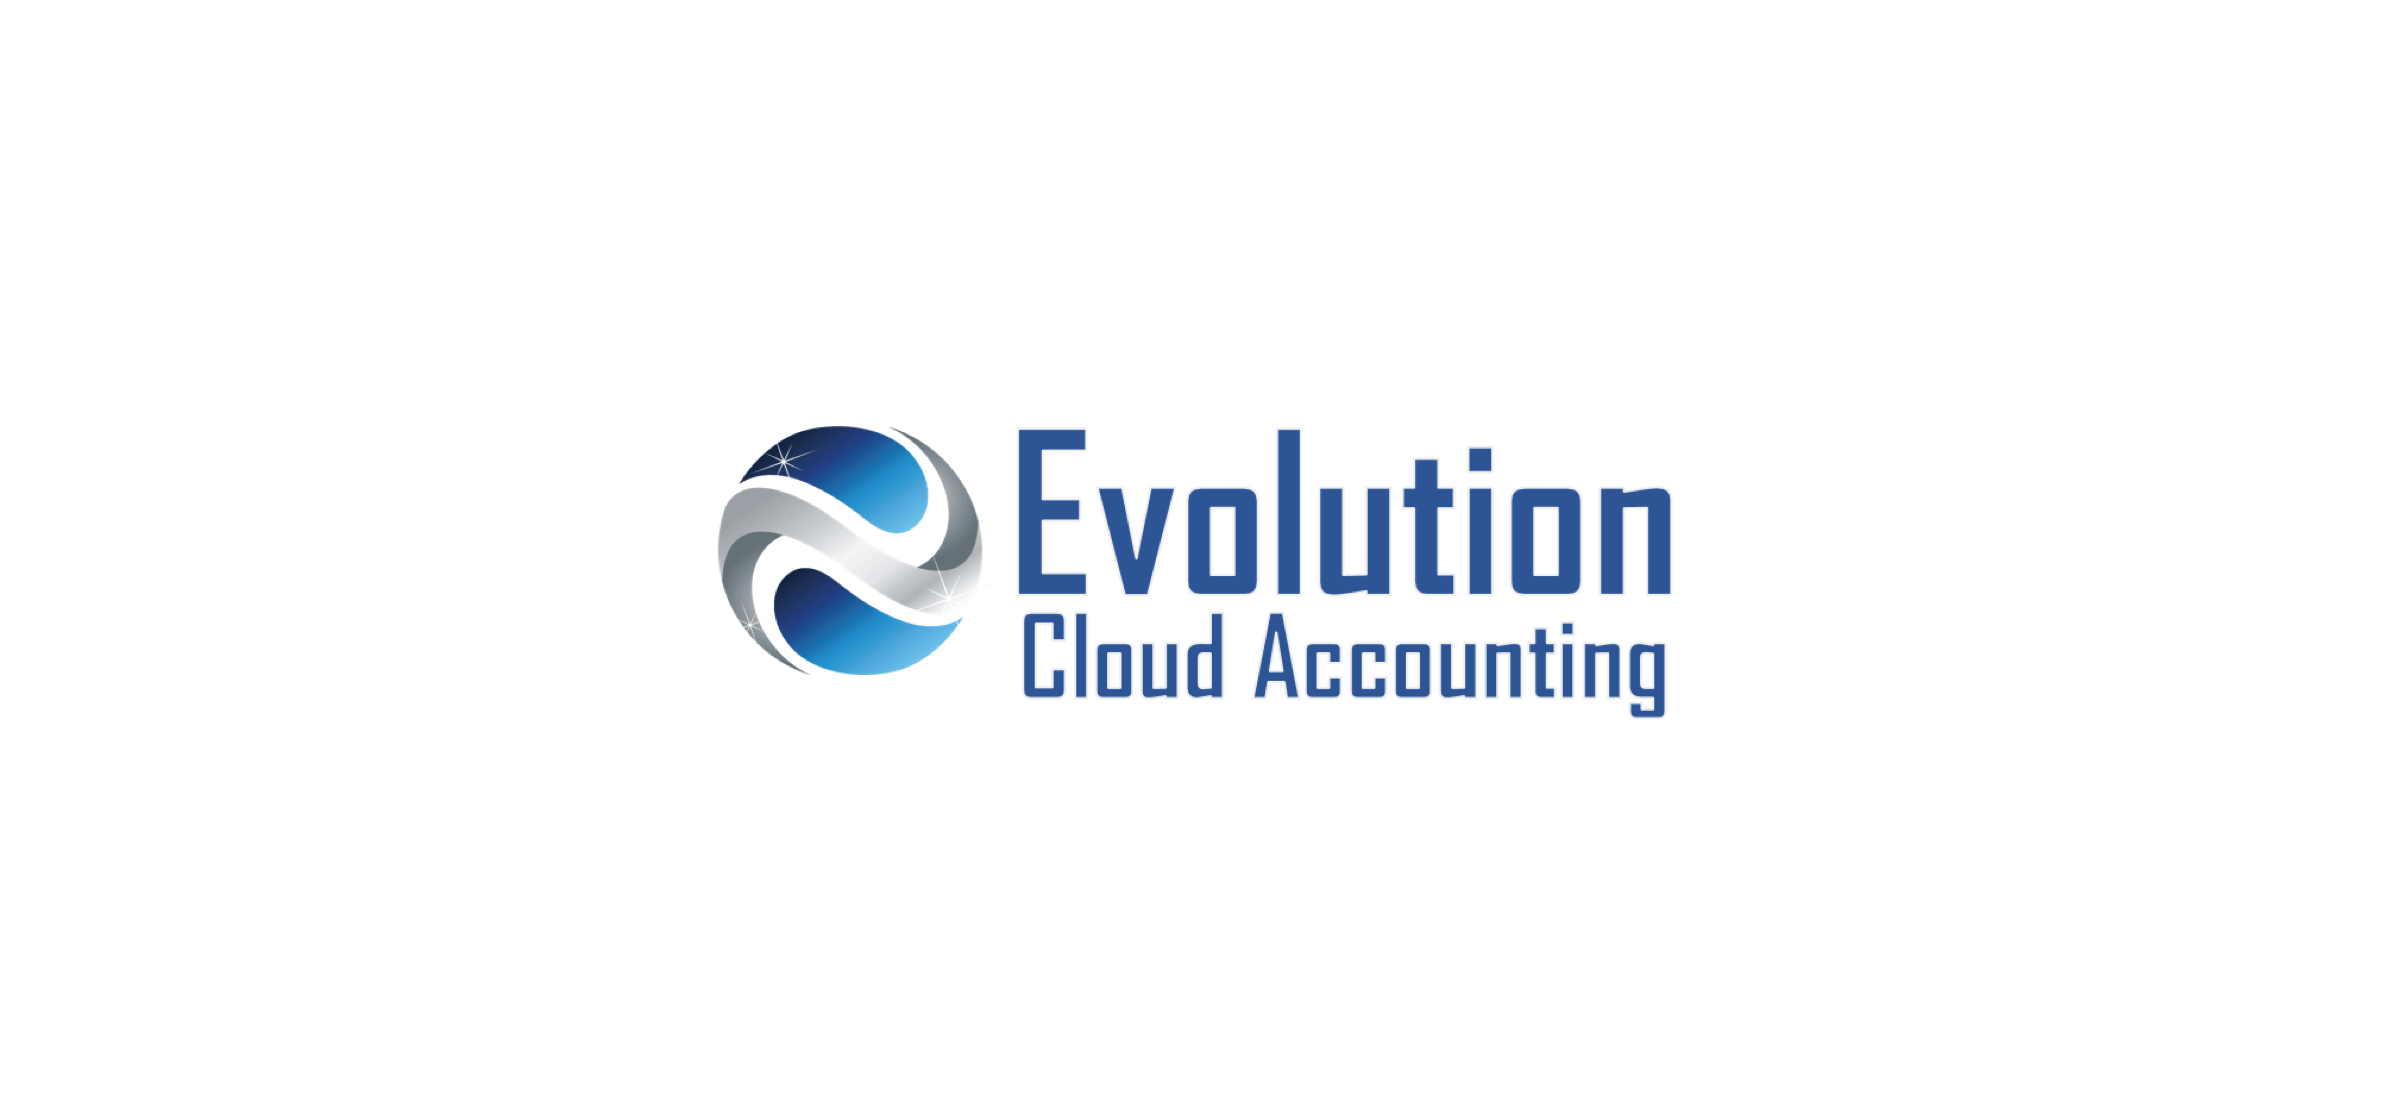 The Evolution Cloud Accounting logo